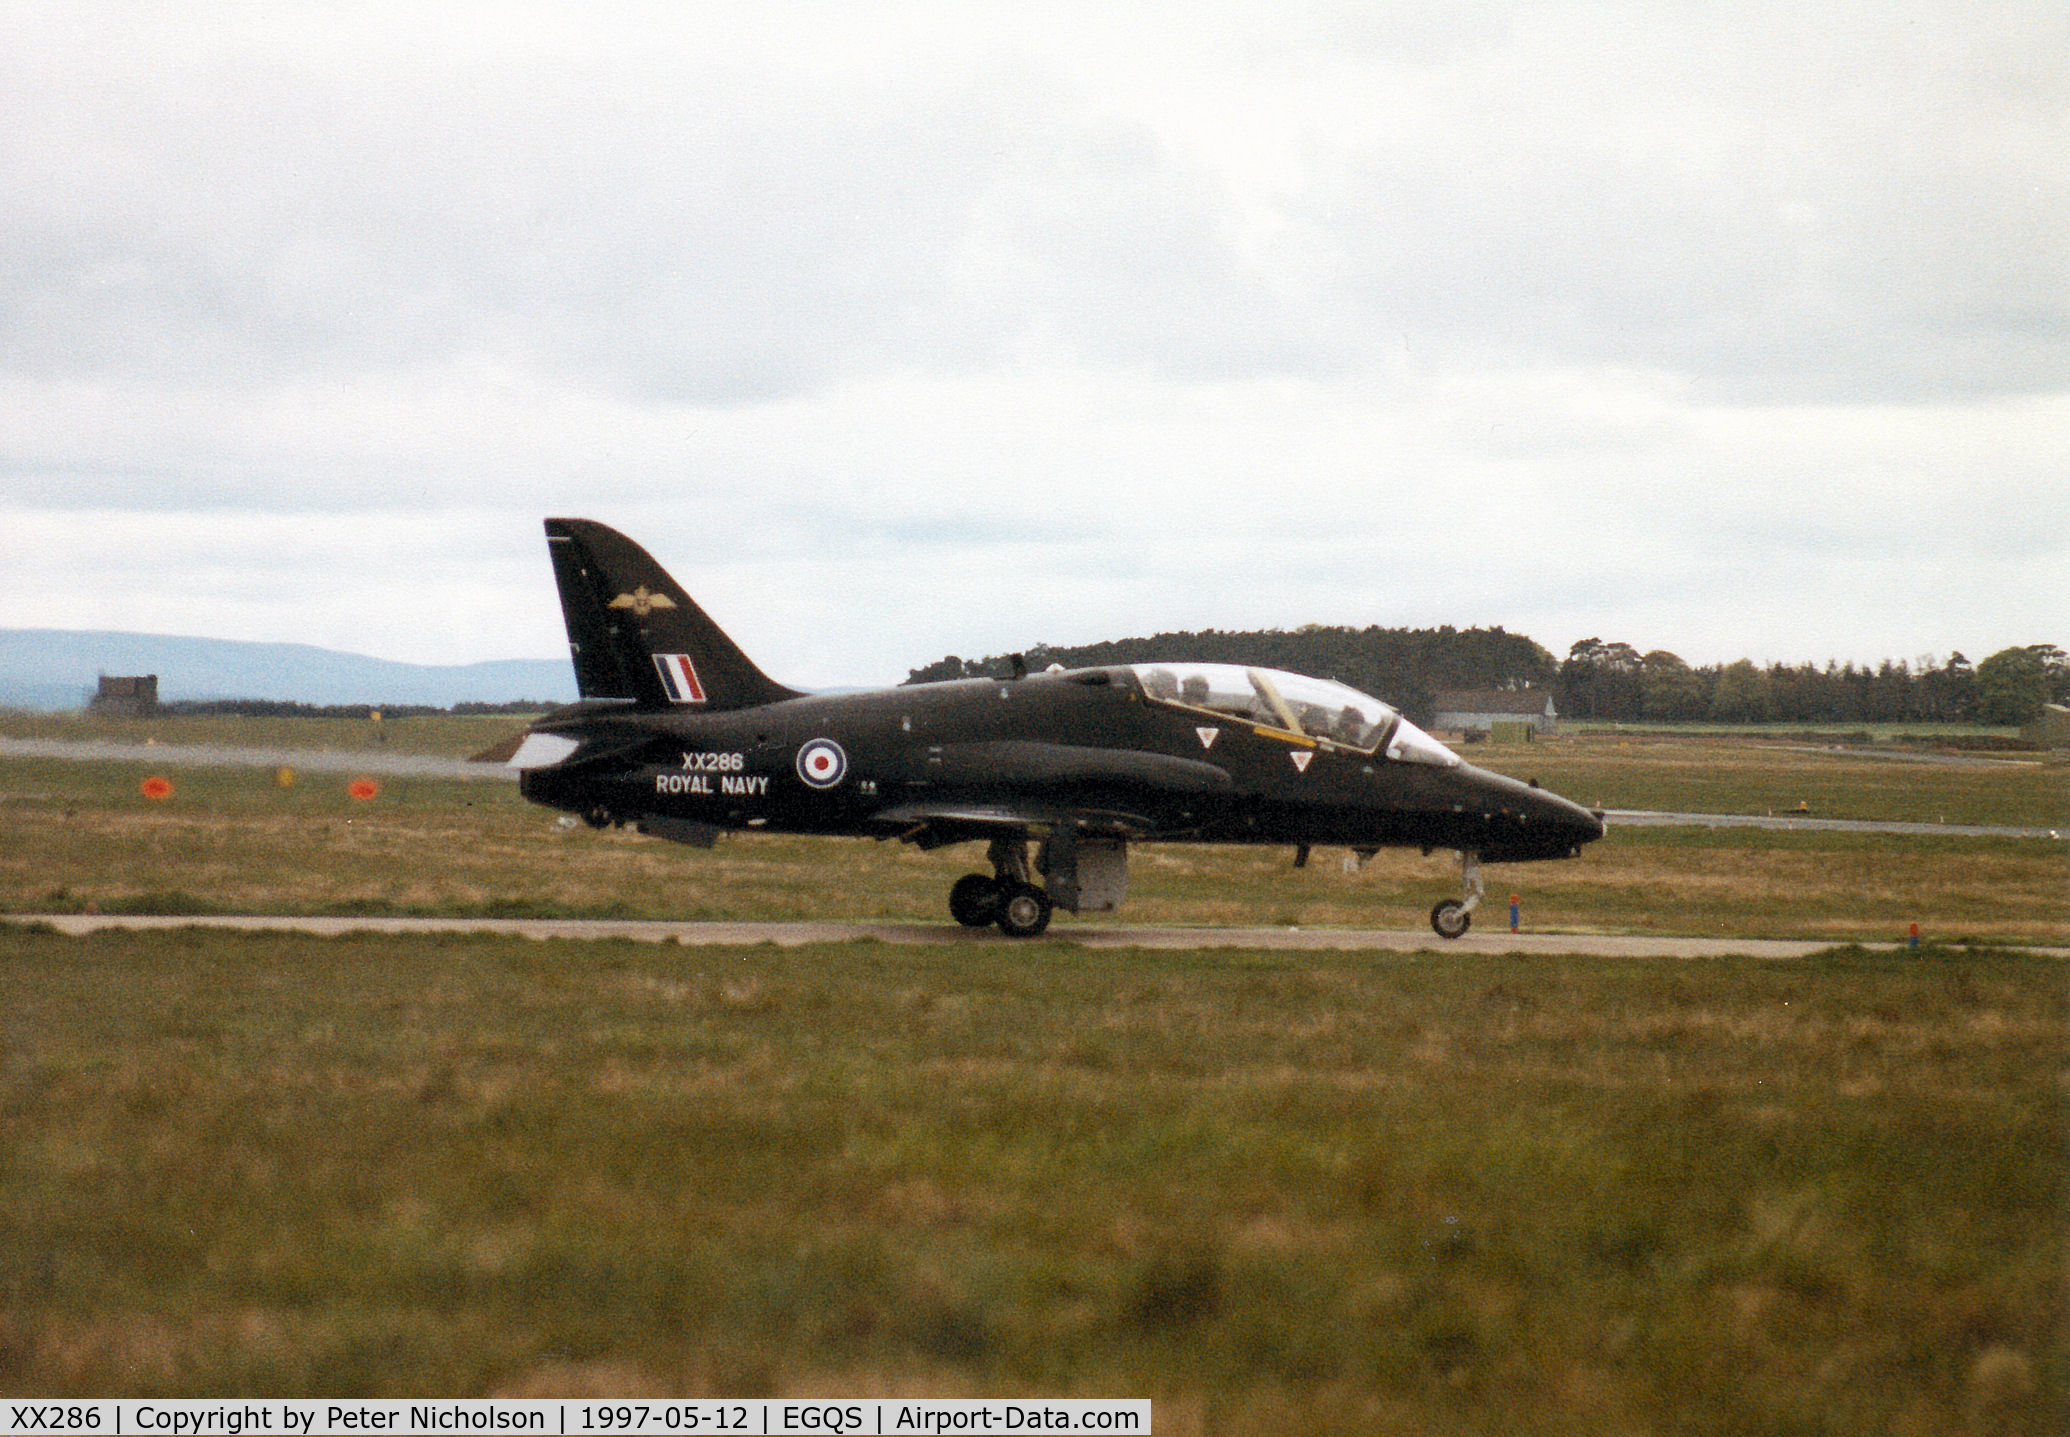 XX286, 1979 Hawker Siddeley Hawk T.1A C/N 112/312111, Hawk T.1A of the Royal Navy's Fleet Requirements & Direction Unit (FRADU) awaiting clearance to join the active runway at RAF Lossiemouth in May 1997.